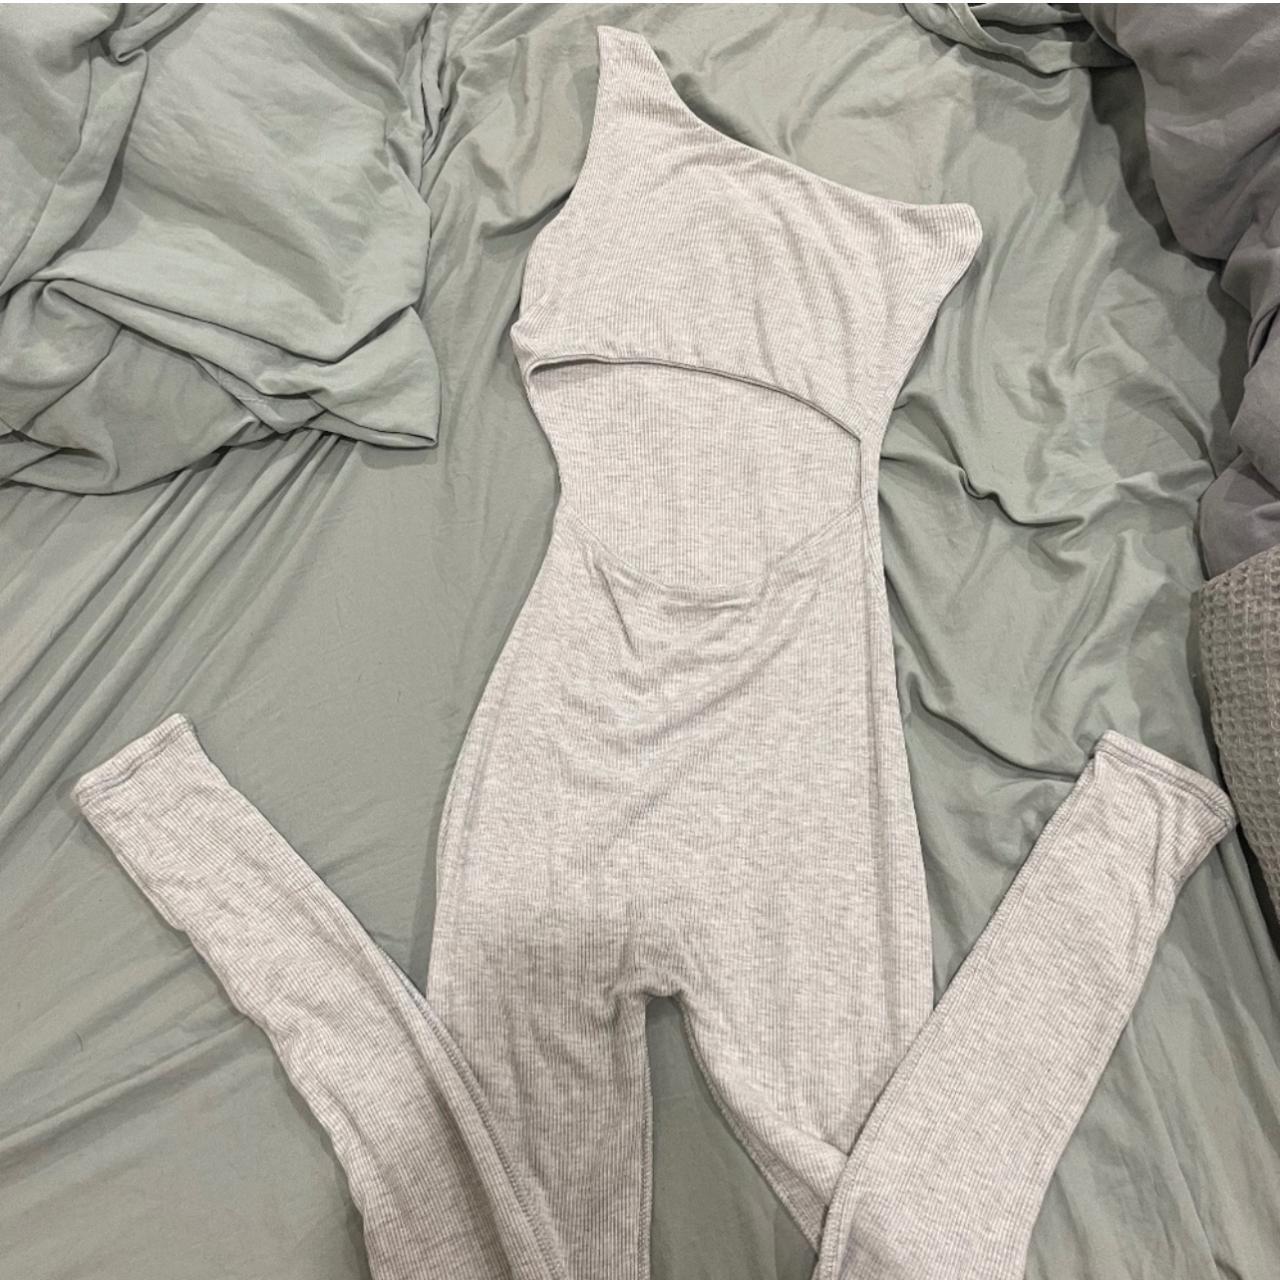 Naked wardrobe grey jump suit Worn 1 time for these - Depop